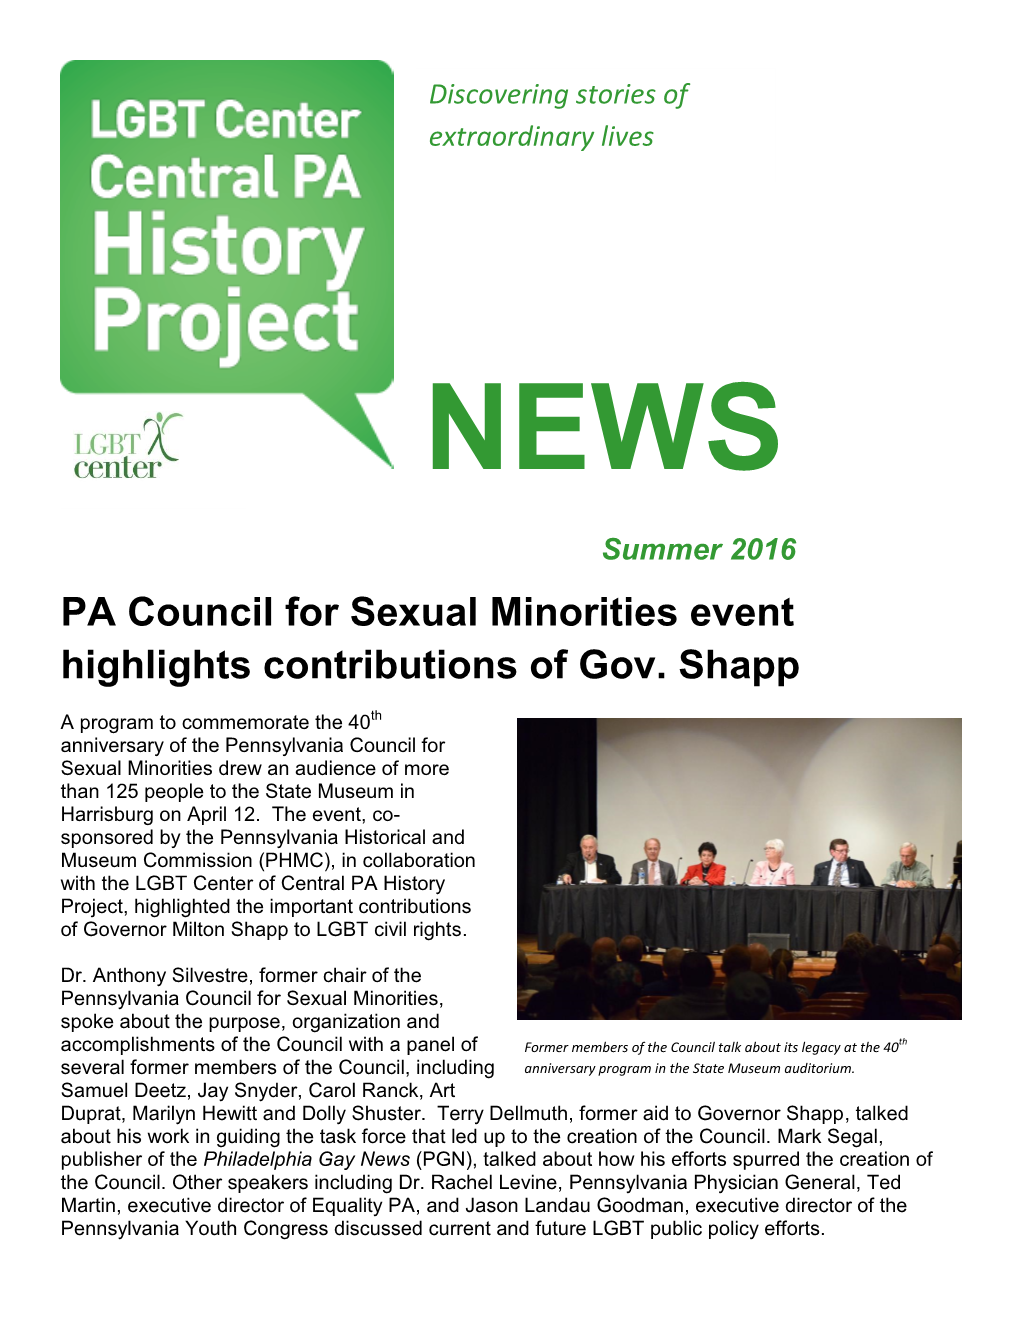 NEWS Summer 2016 PA Council for Sexual Minorities Event Highlights